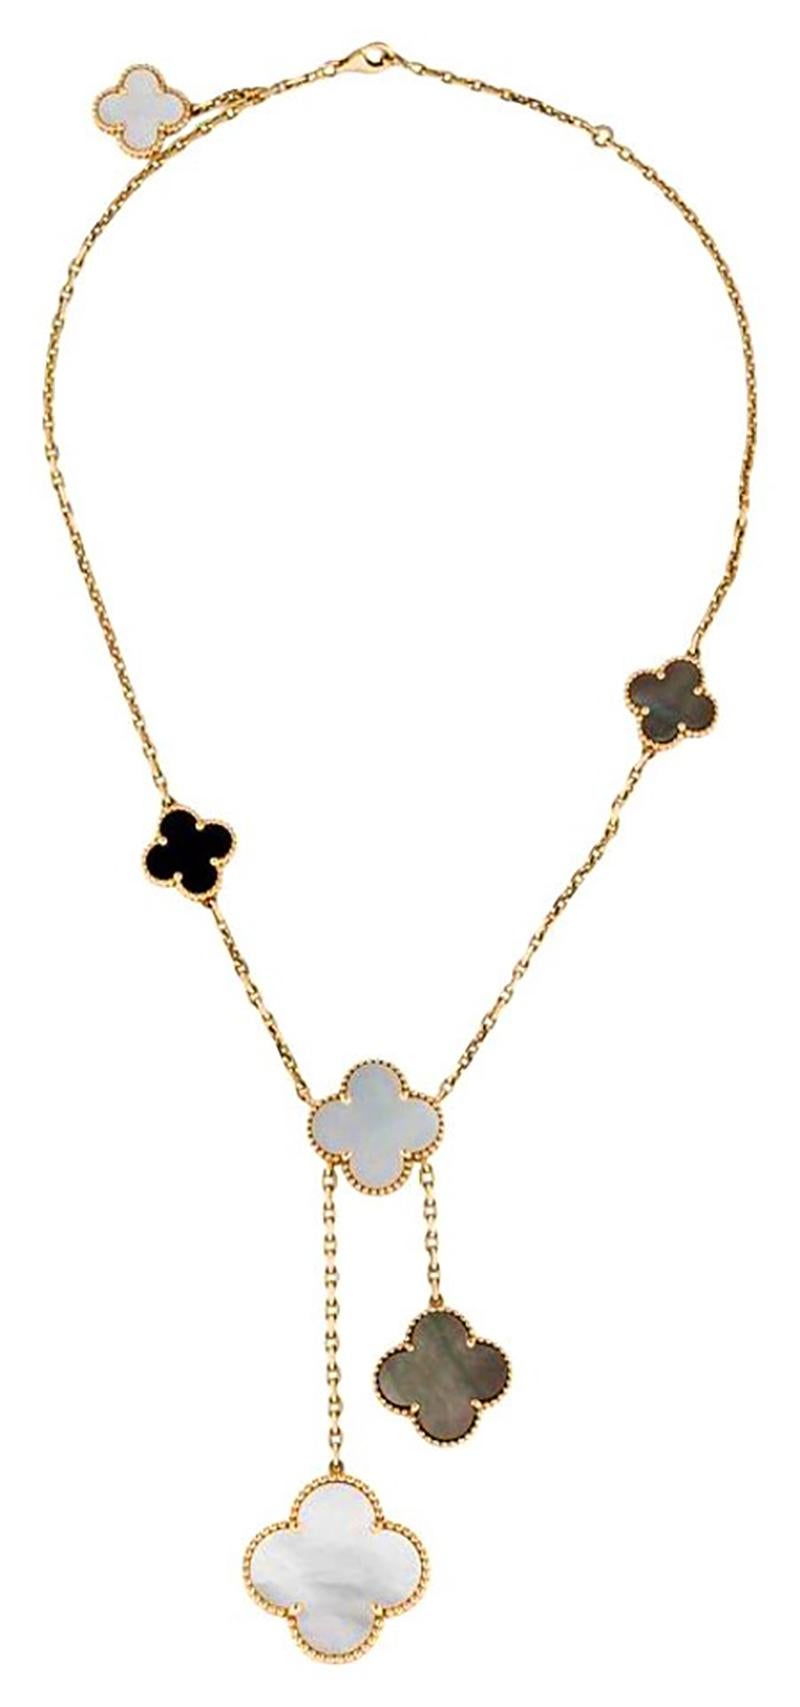 The Magic Alhambra jewelry creations gather different-sized Alhambra motifs, coming together in a joyful dance. Inspired by the clover leaf, their asymmetric designs feature different associations of materials.

Magic Alhambra necklace, 6 motifs,